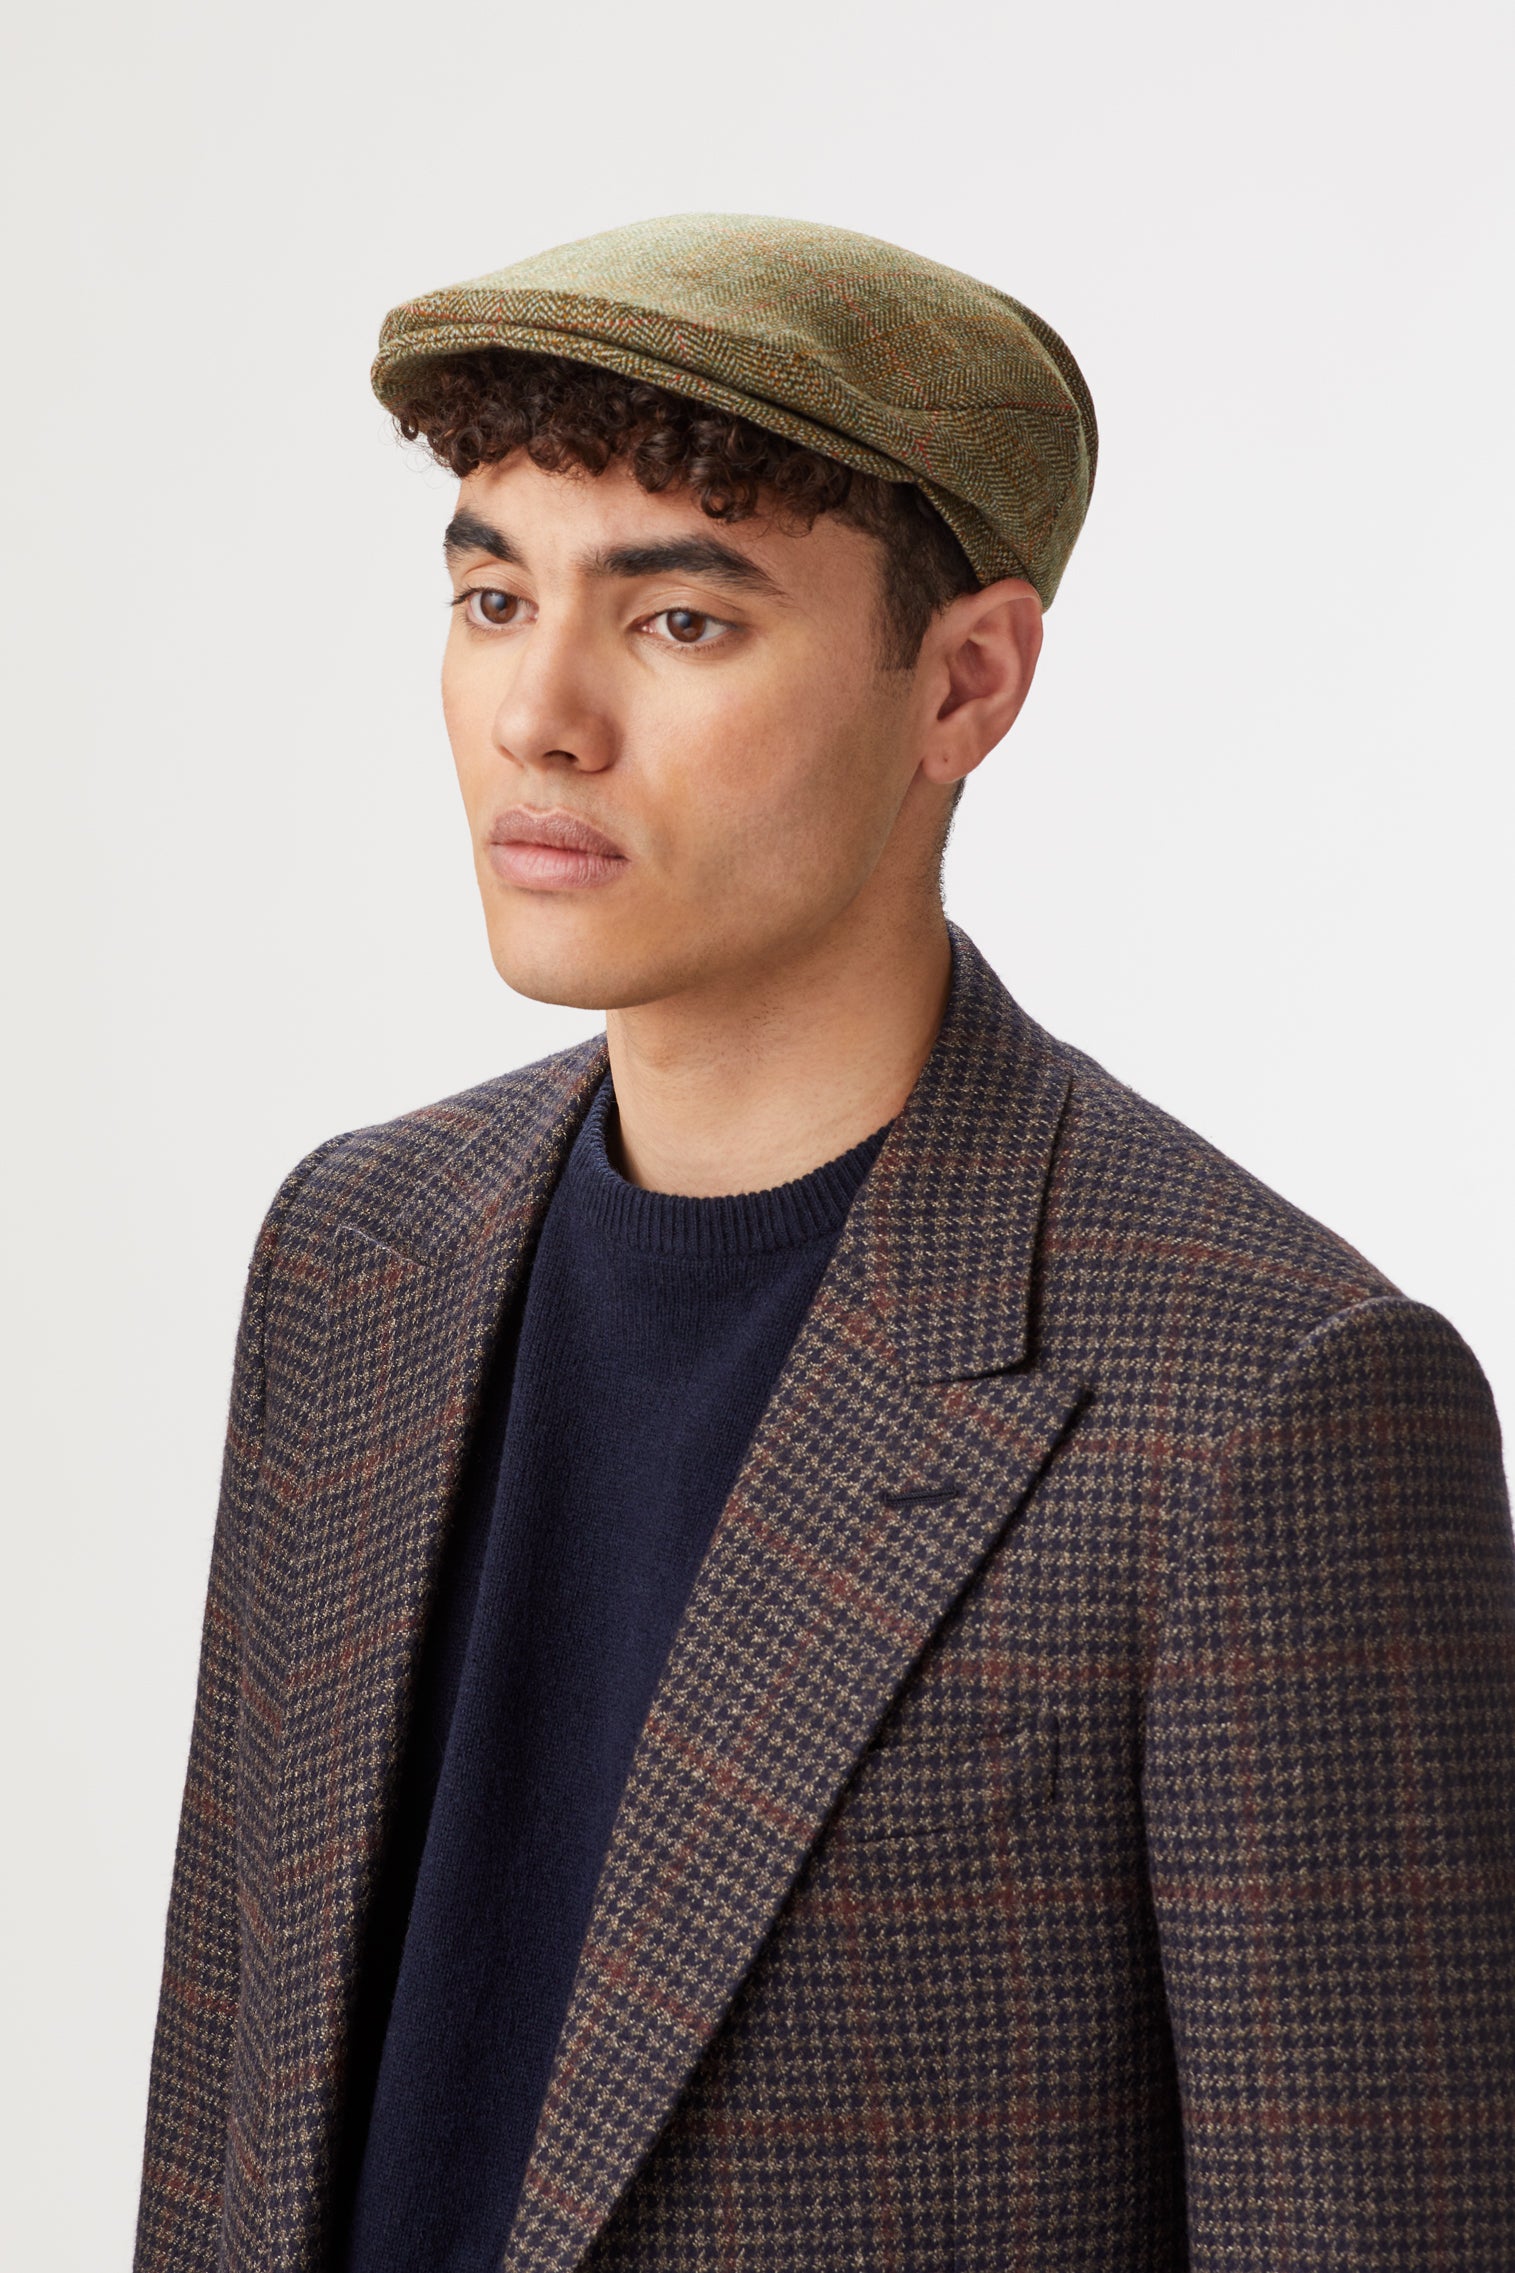 Oslo Tweed Flat Cap - Hats for Oval Face Shapes - Lock & Co. Hatters London UK